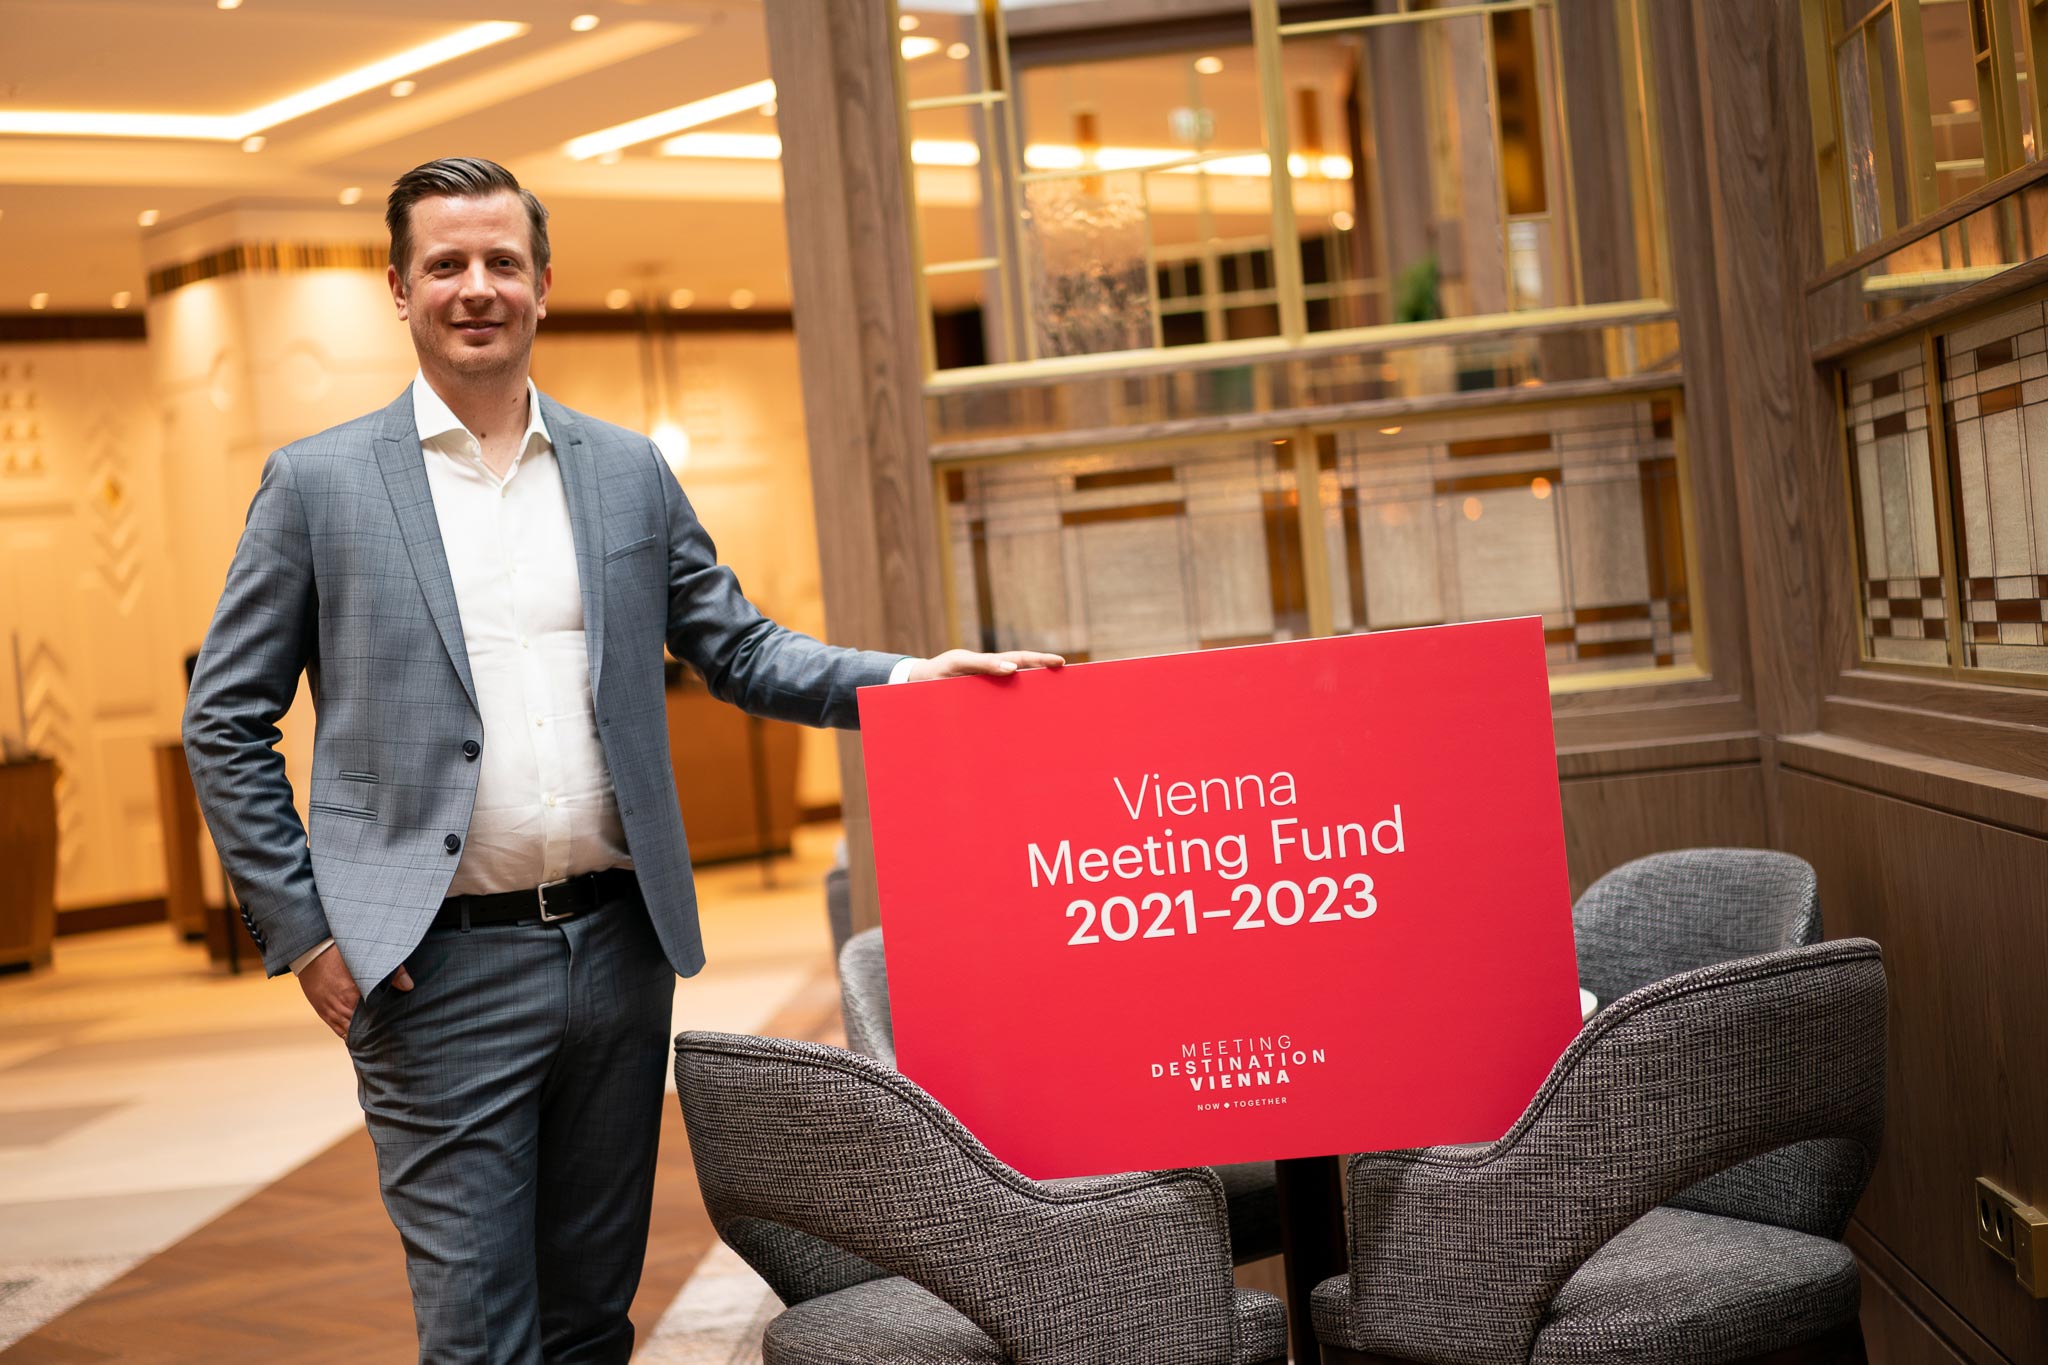 Christian Woronka, Director of the Vienna Convention Bureau standing with his hand on a sign for the Vienna Meeting Fund 2021–2023.